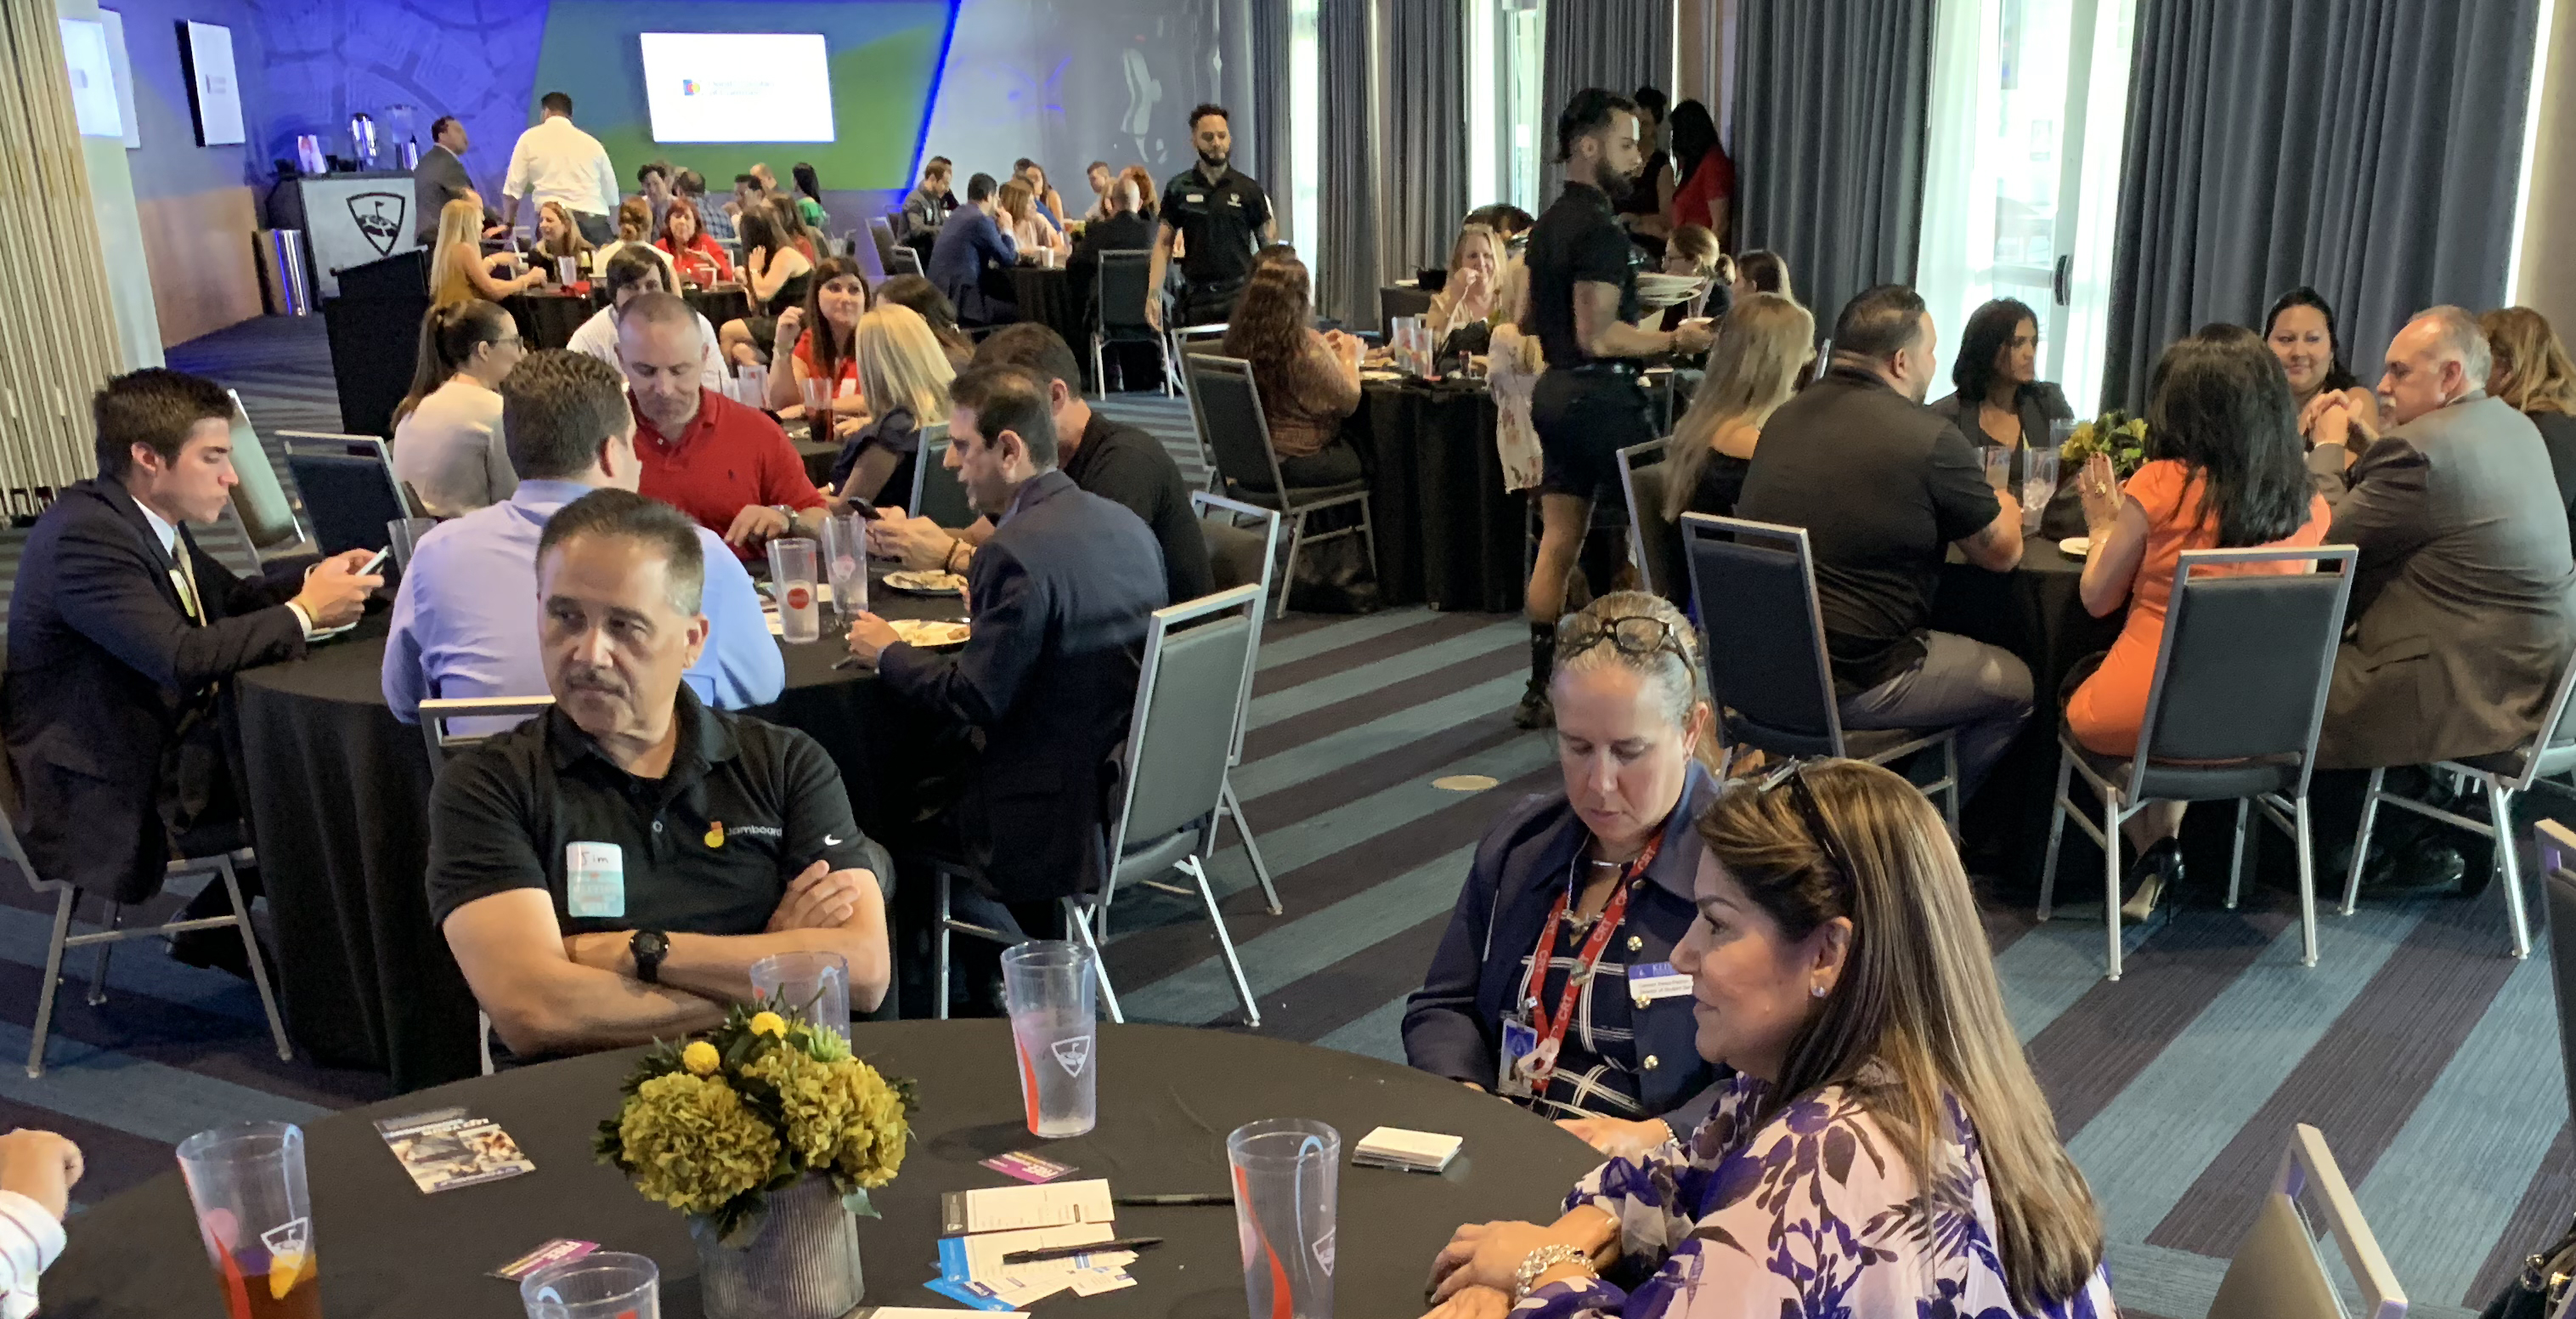 Doral Chamber of Commerce introduces members networking and being served drinks at Topgolf Doral.